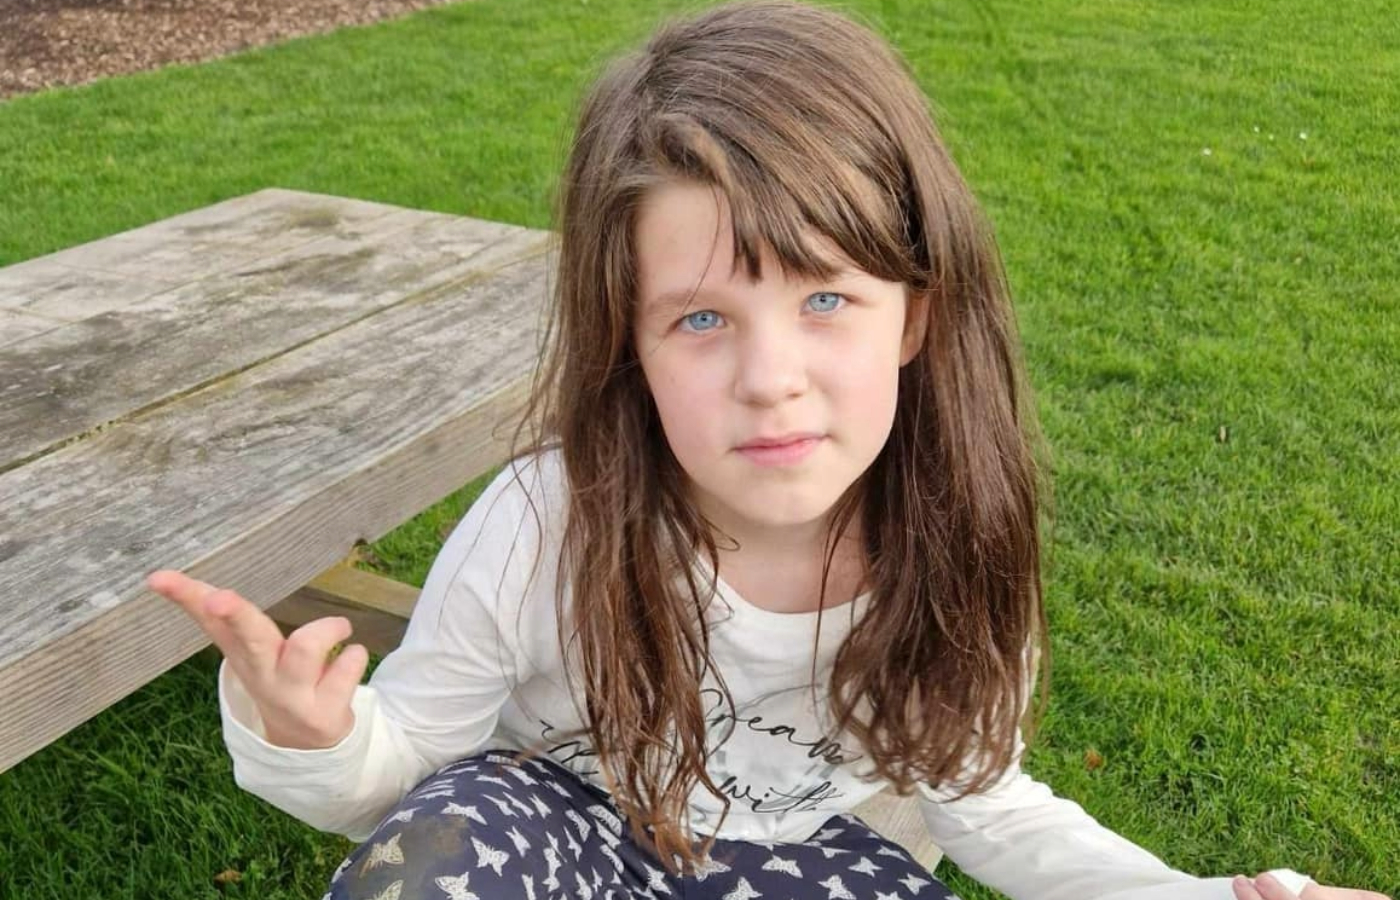 10-year-old Jessica Rennie's death was confirmed by police on Wednesday evening with tributes flooding in. Photo: Supplied.